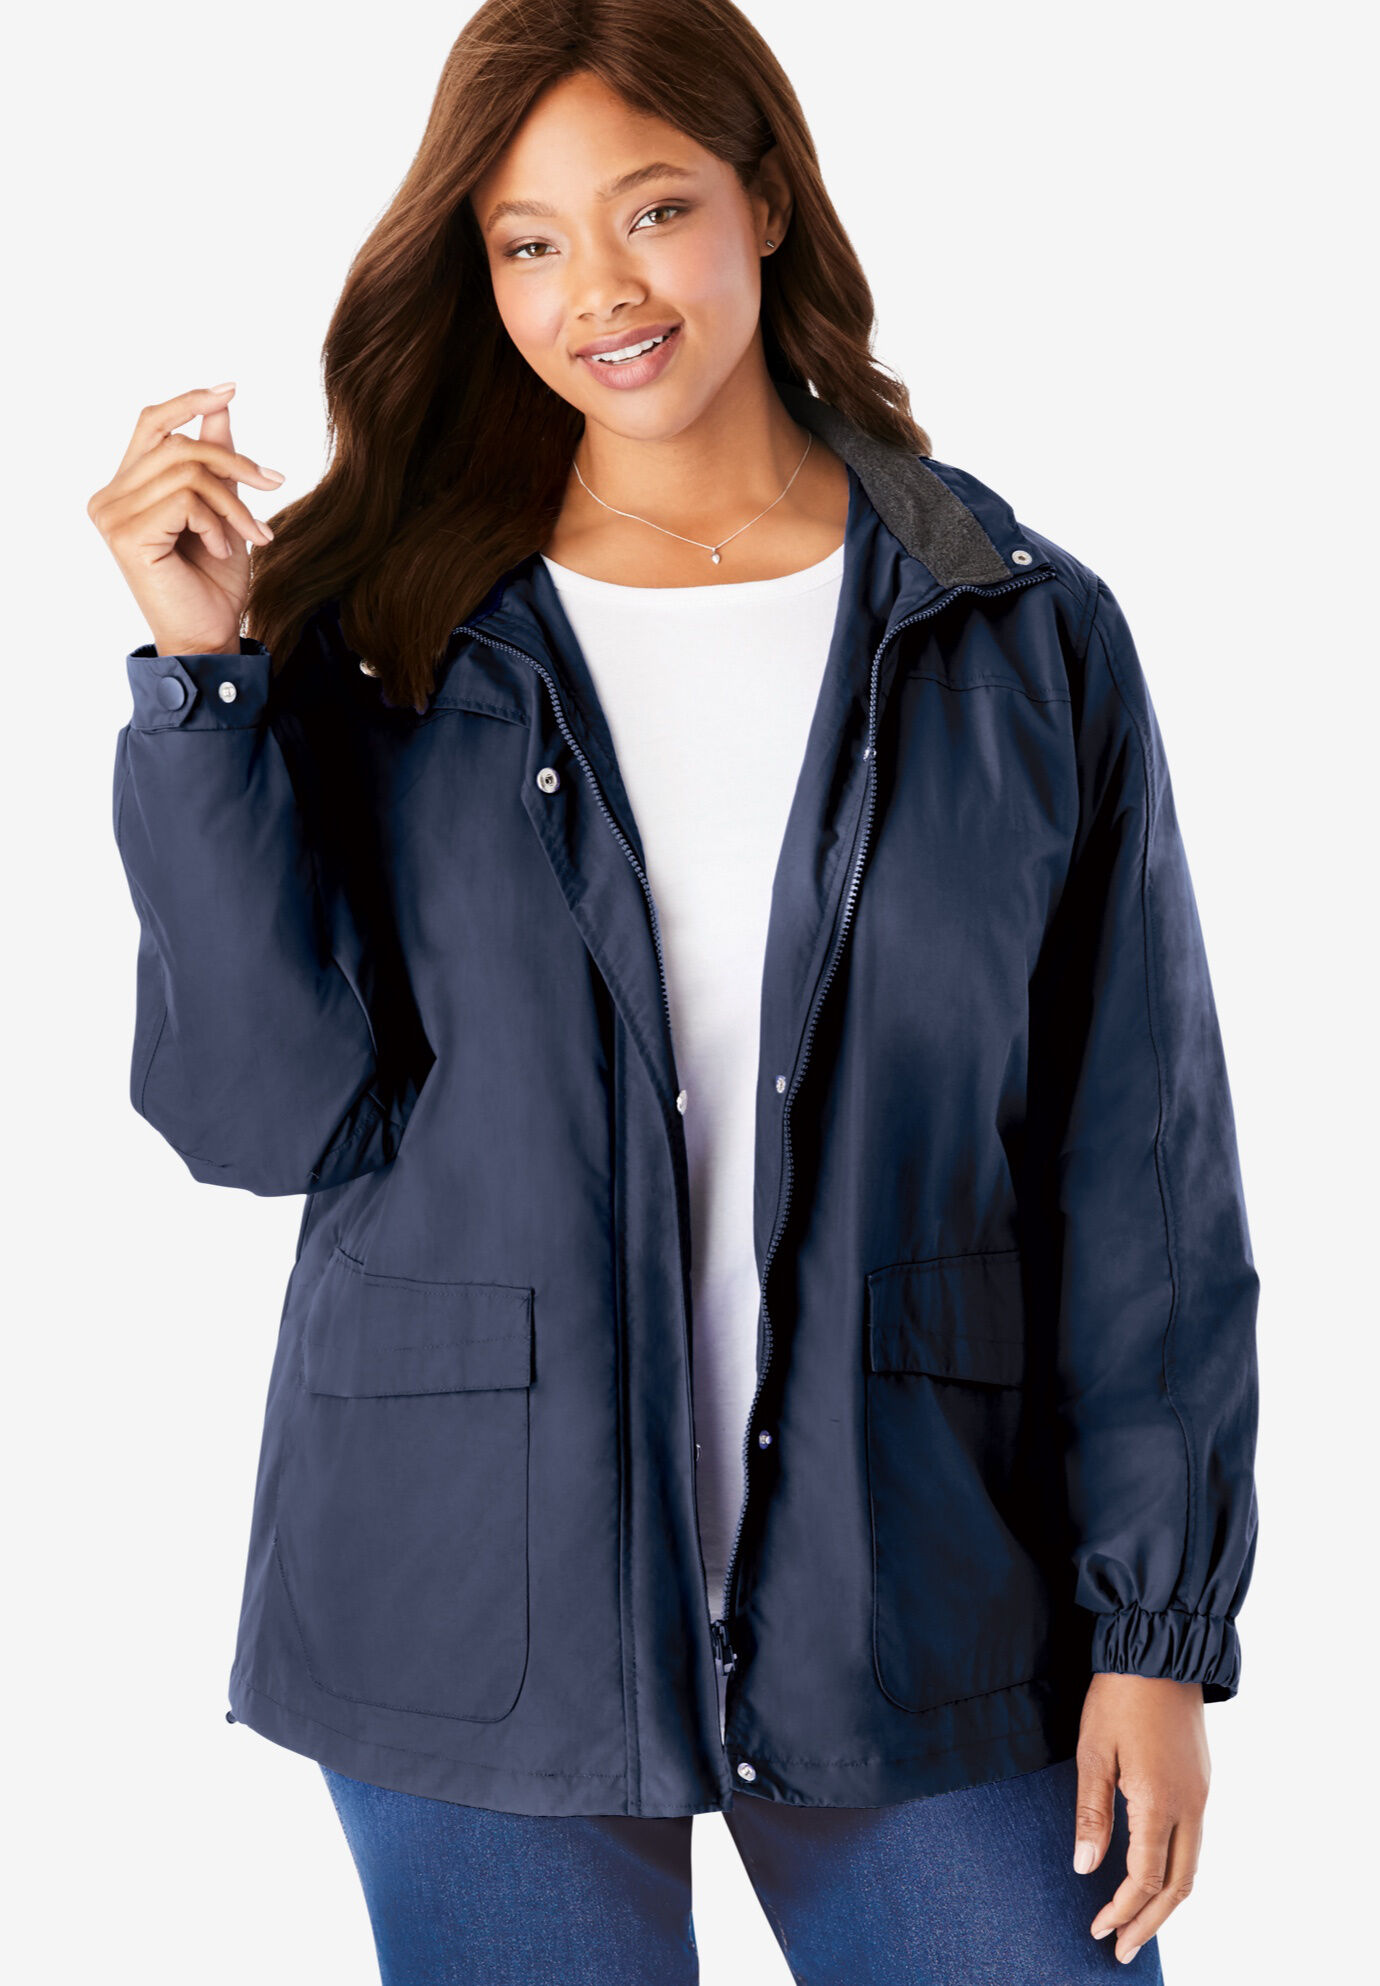 Woman Within Womens Plus Size 3-in-1 Hooded Taslon Jacket 